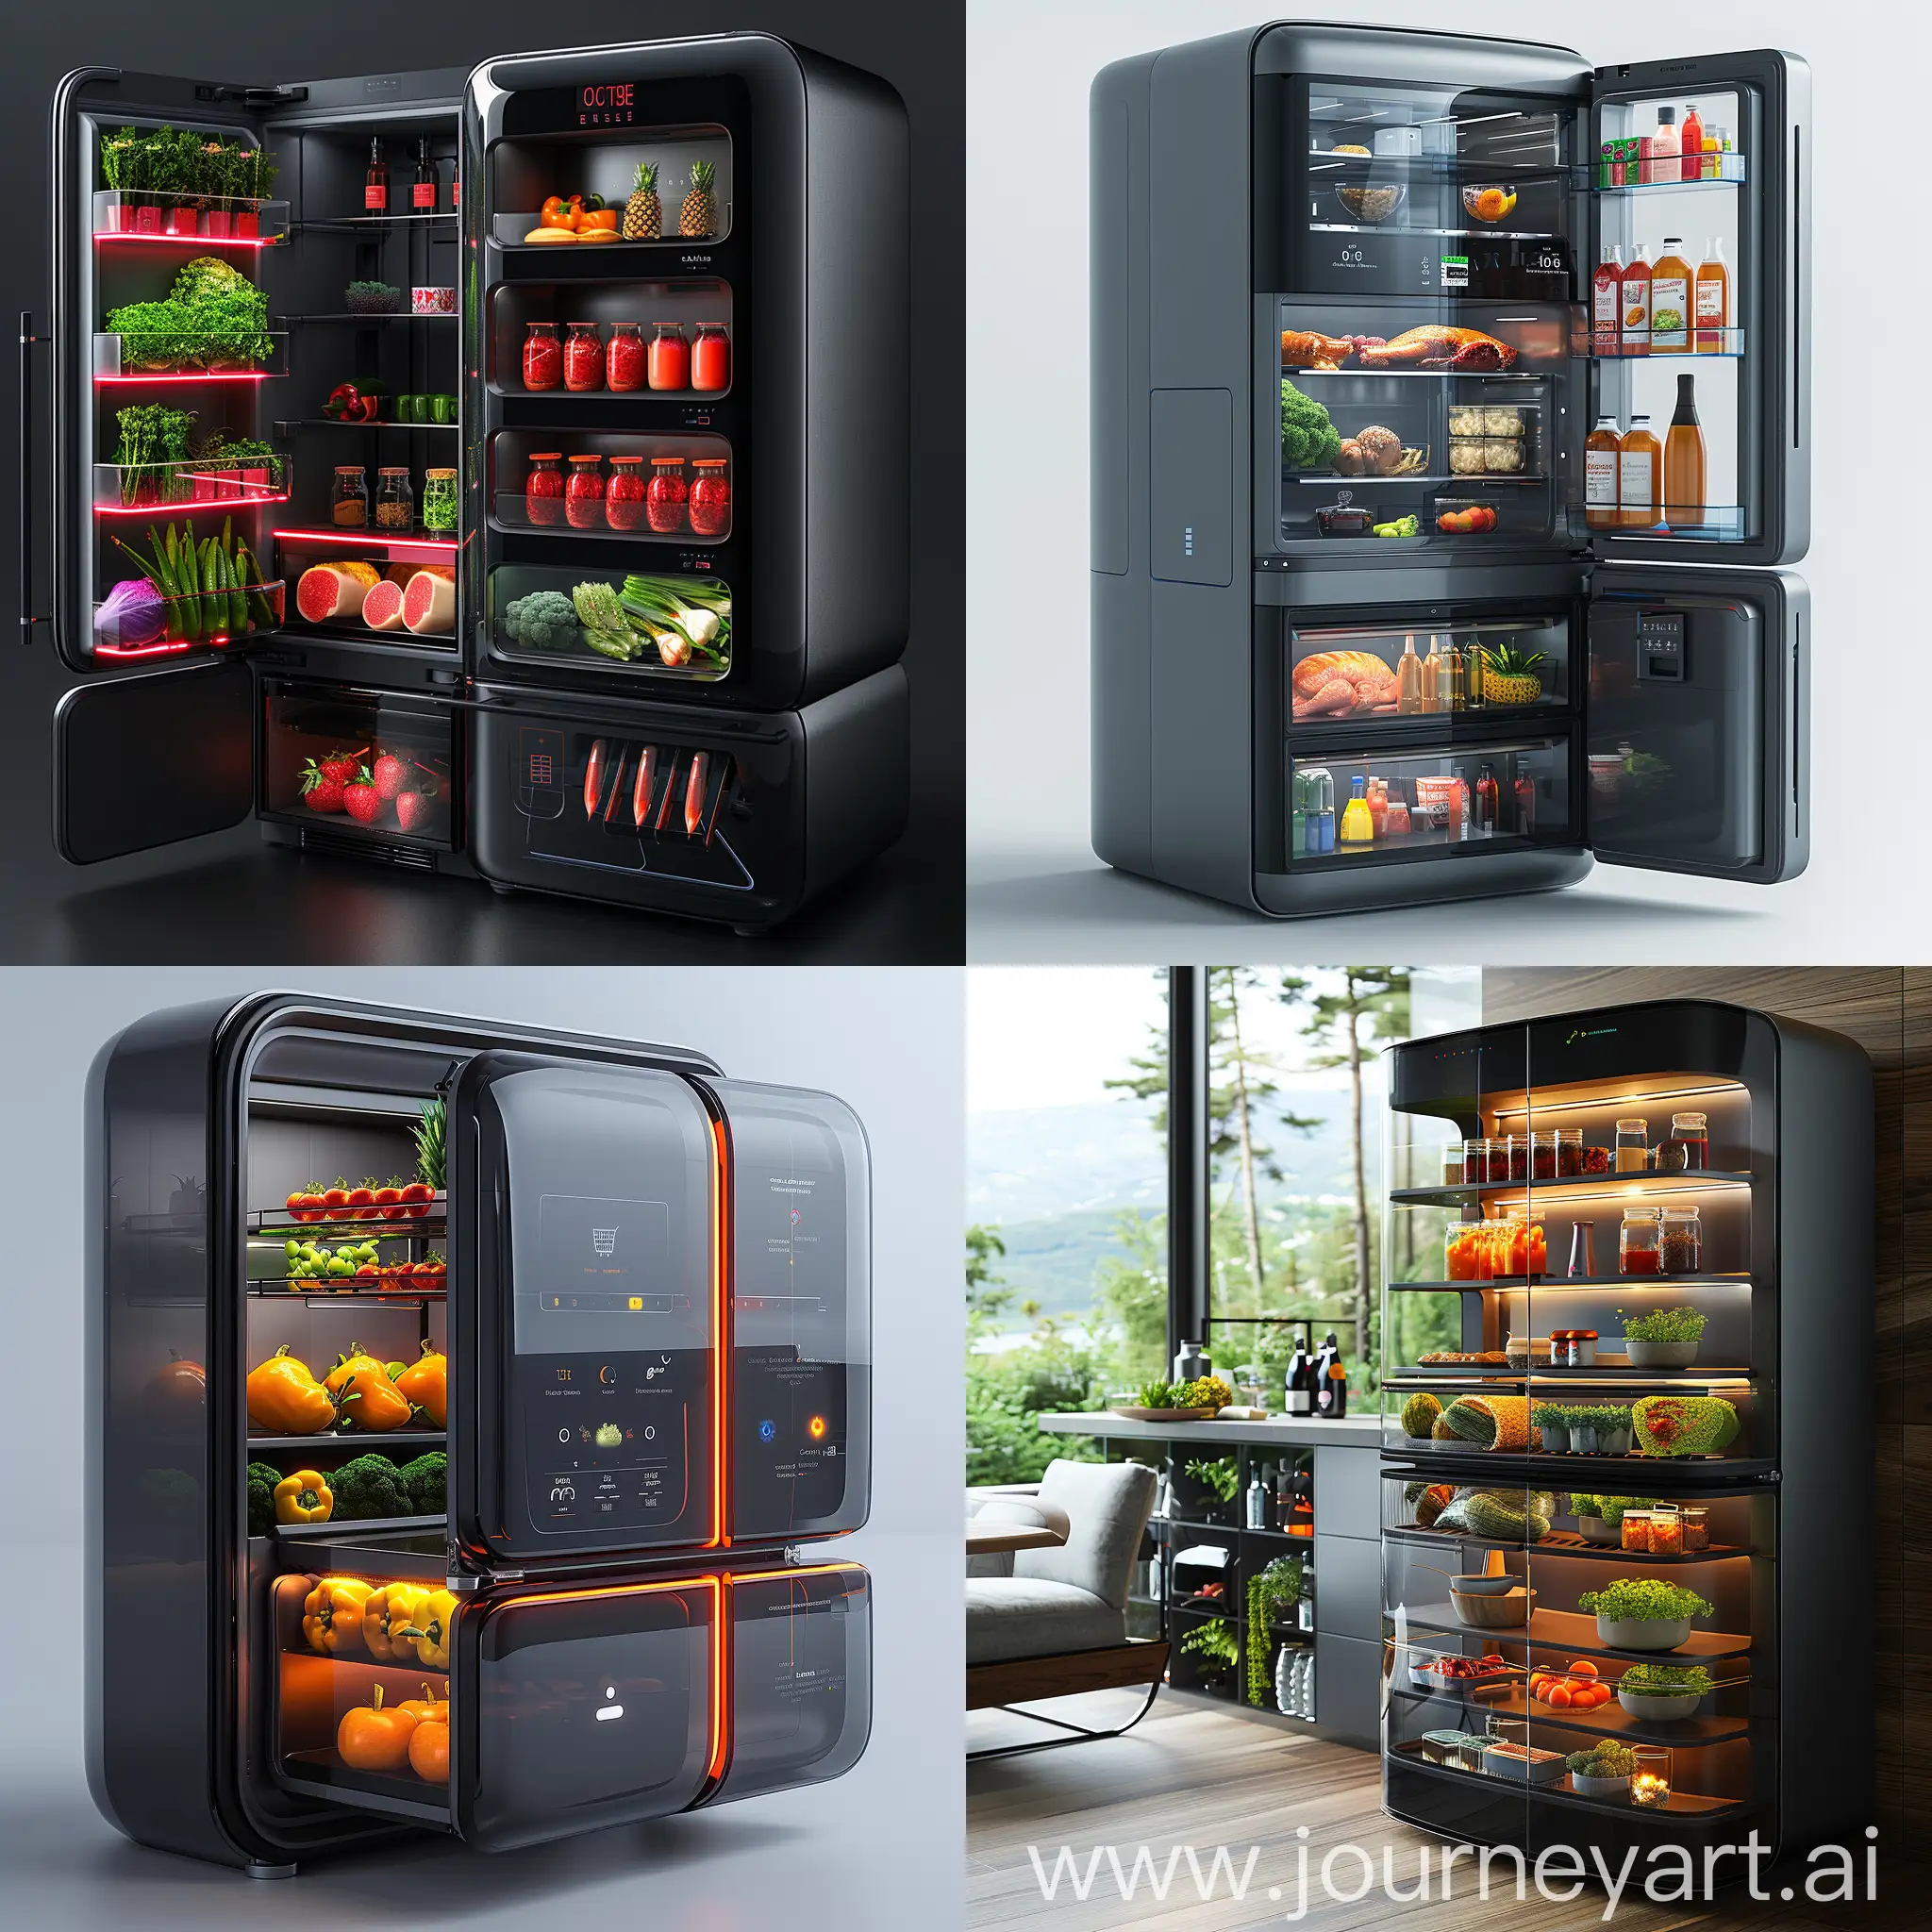 Smart-Home-Integrated-Futuristic-Fridge-with-Touchscreen-Display-and-Food-Recognition